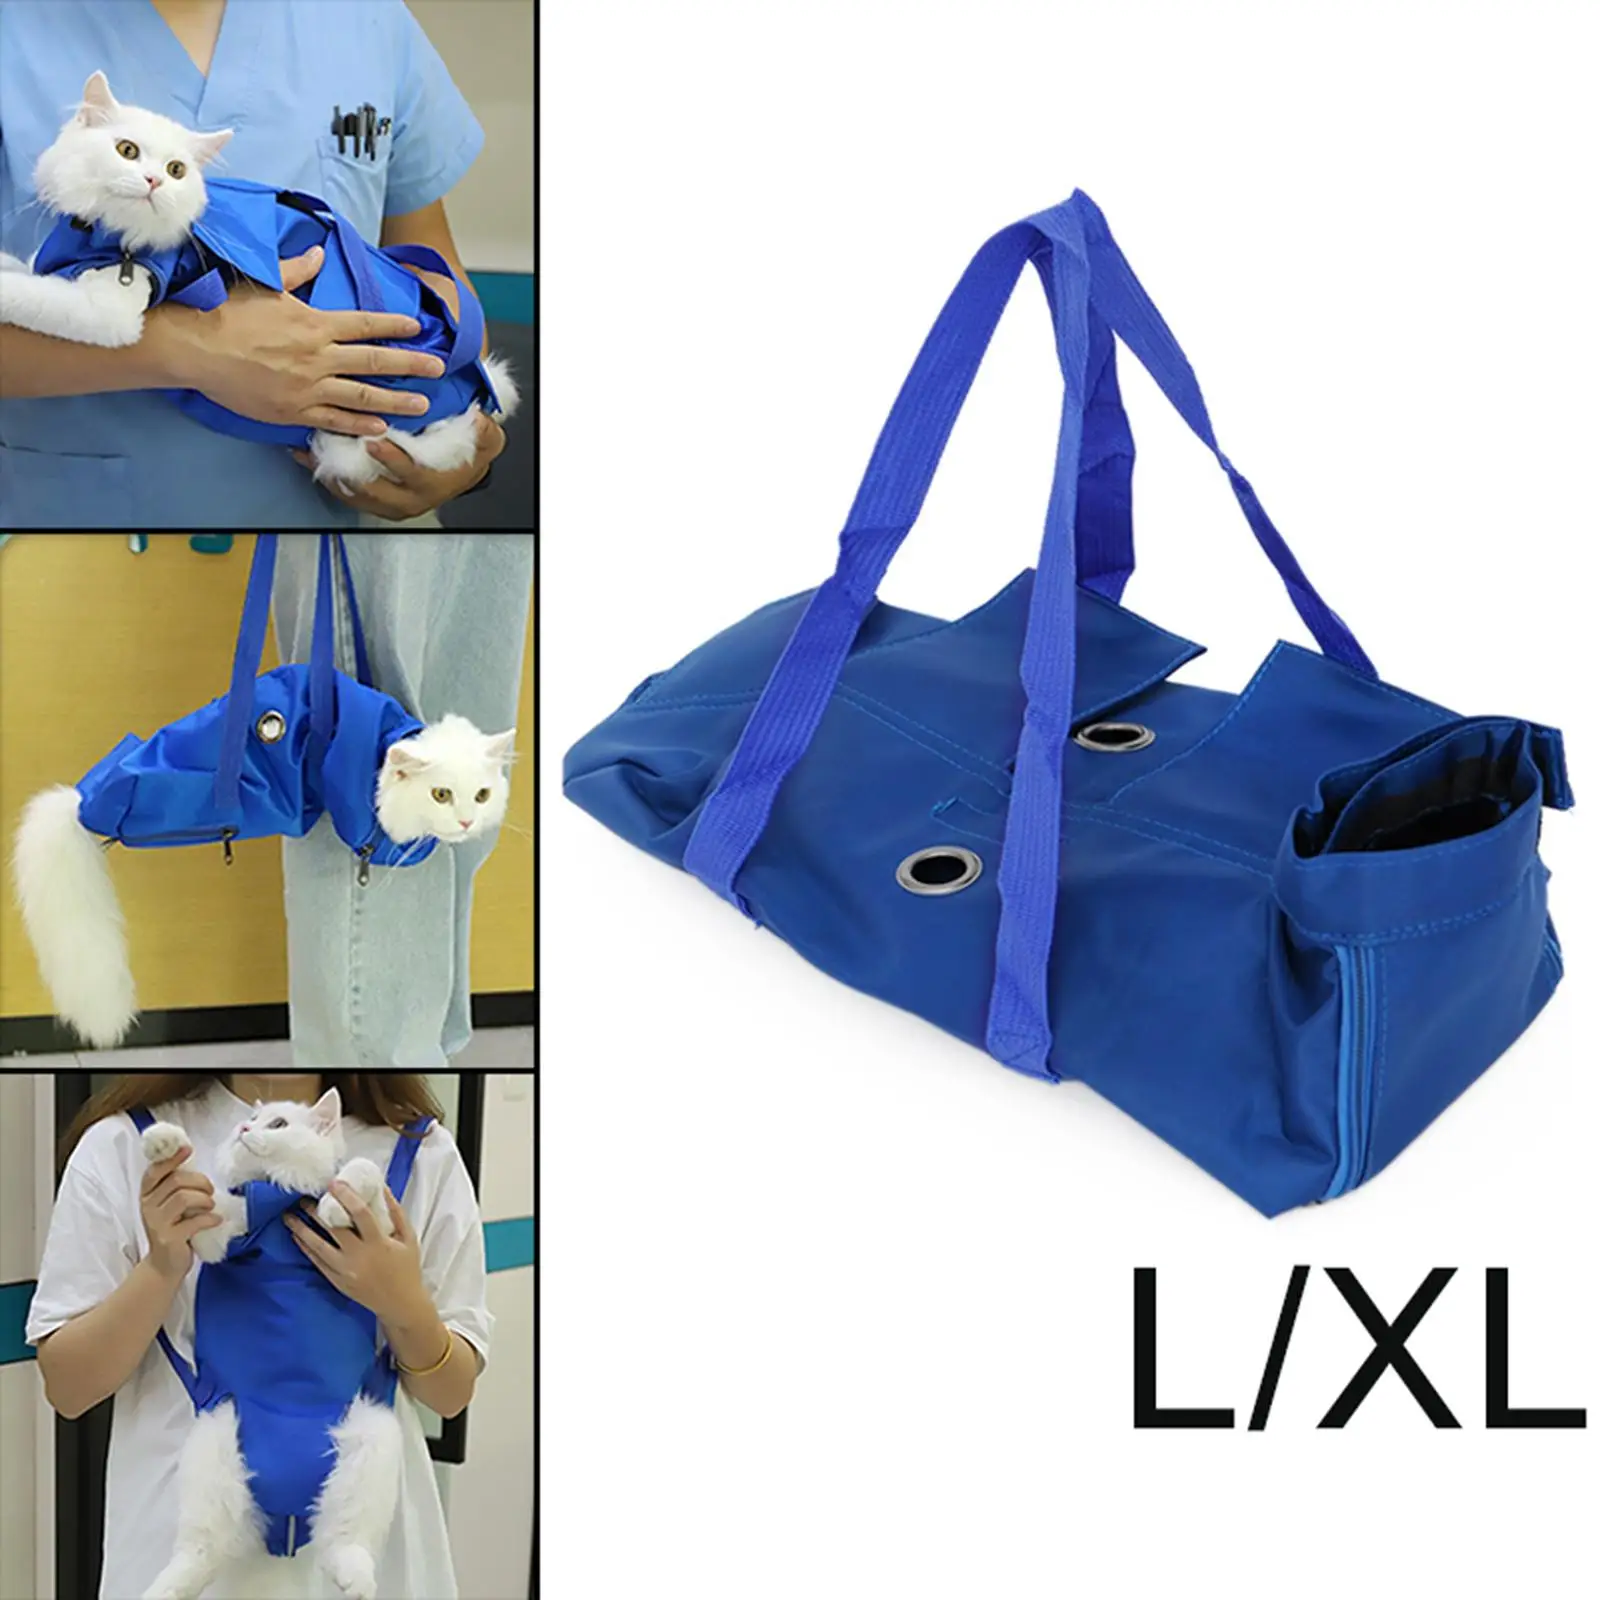 Cat Grooming Restraint Bag Oxford Cloth Adjustable Size Holder Bag Fixed Bag for Nail Cutting Washing Manicure Pets Short Trips